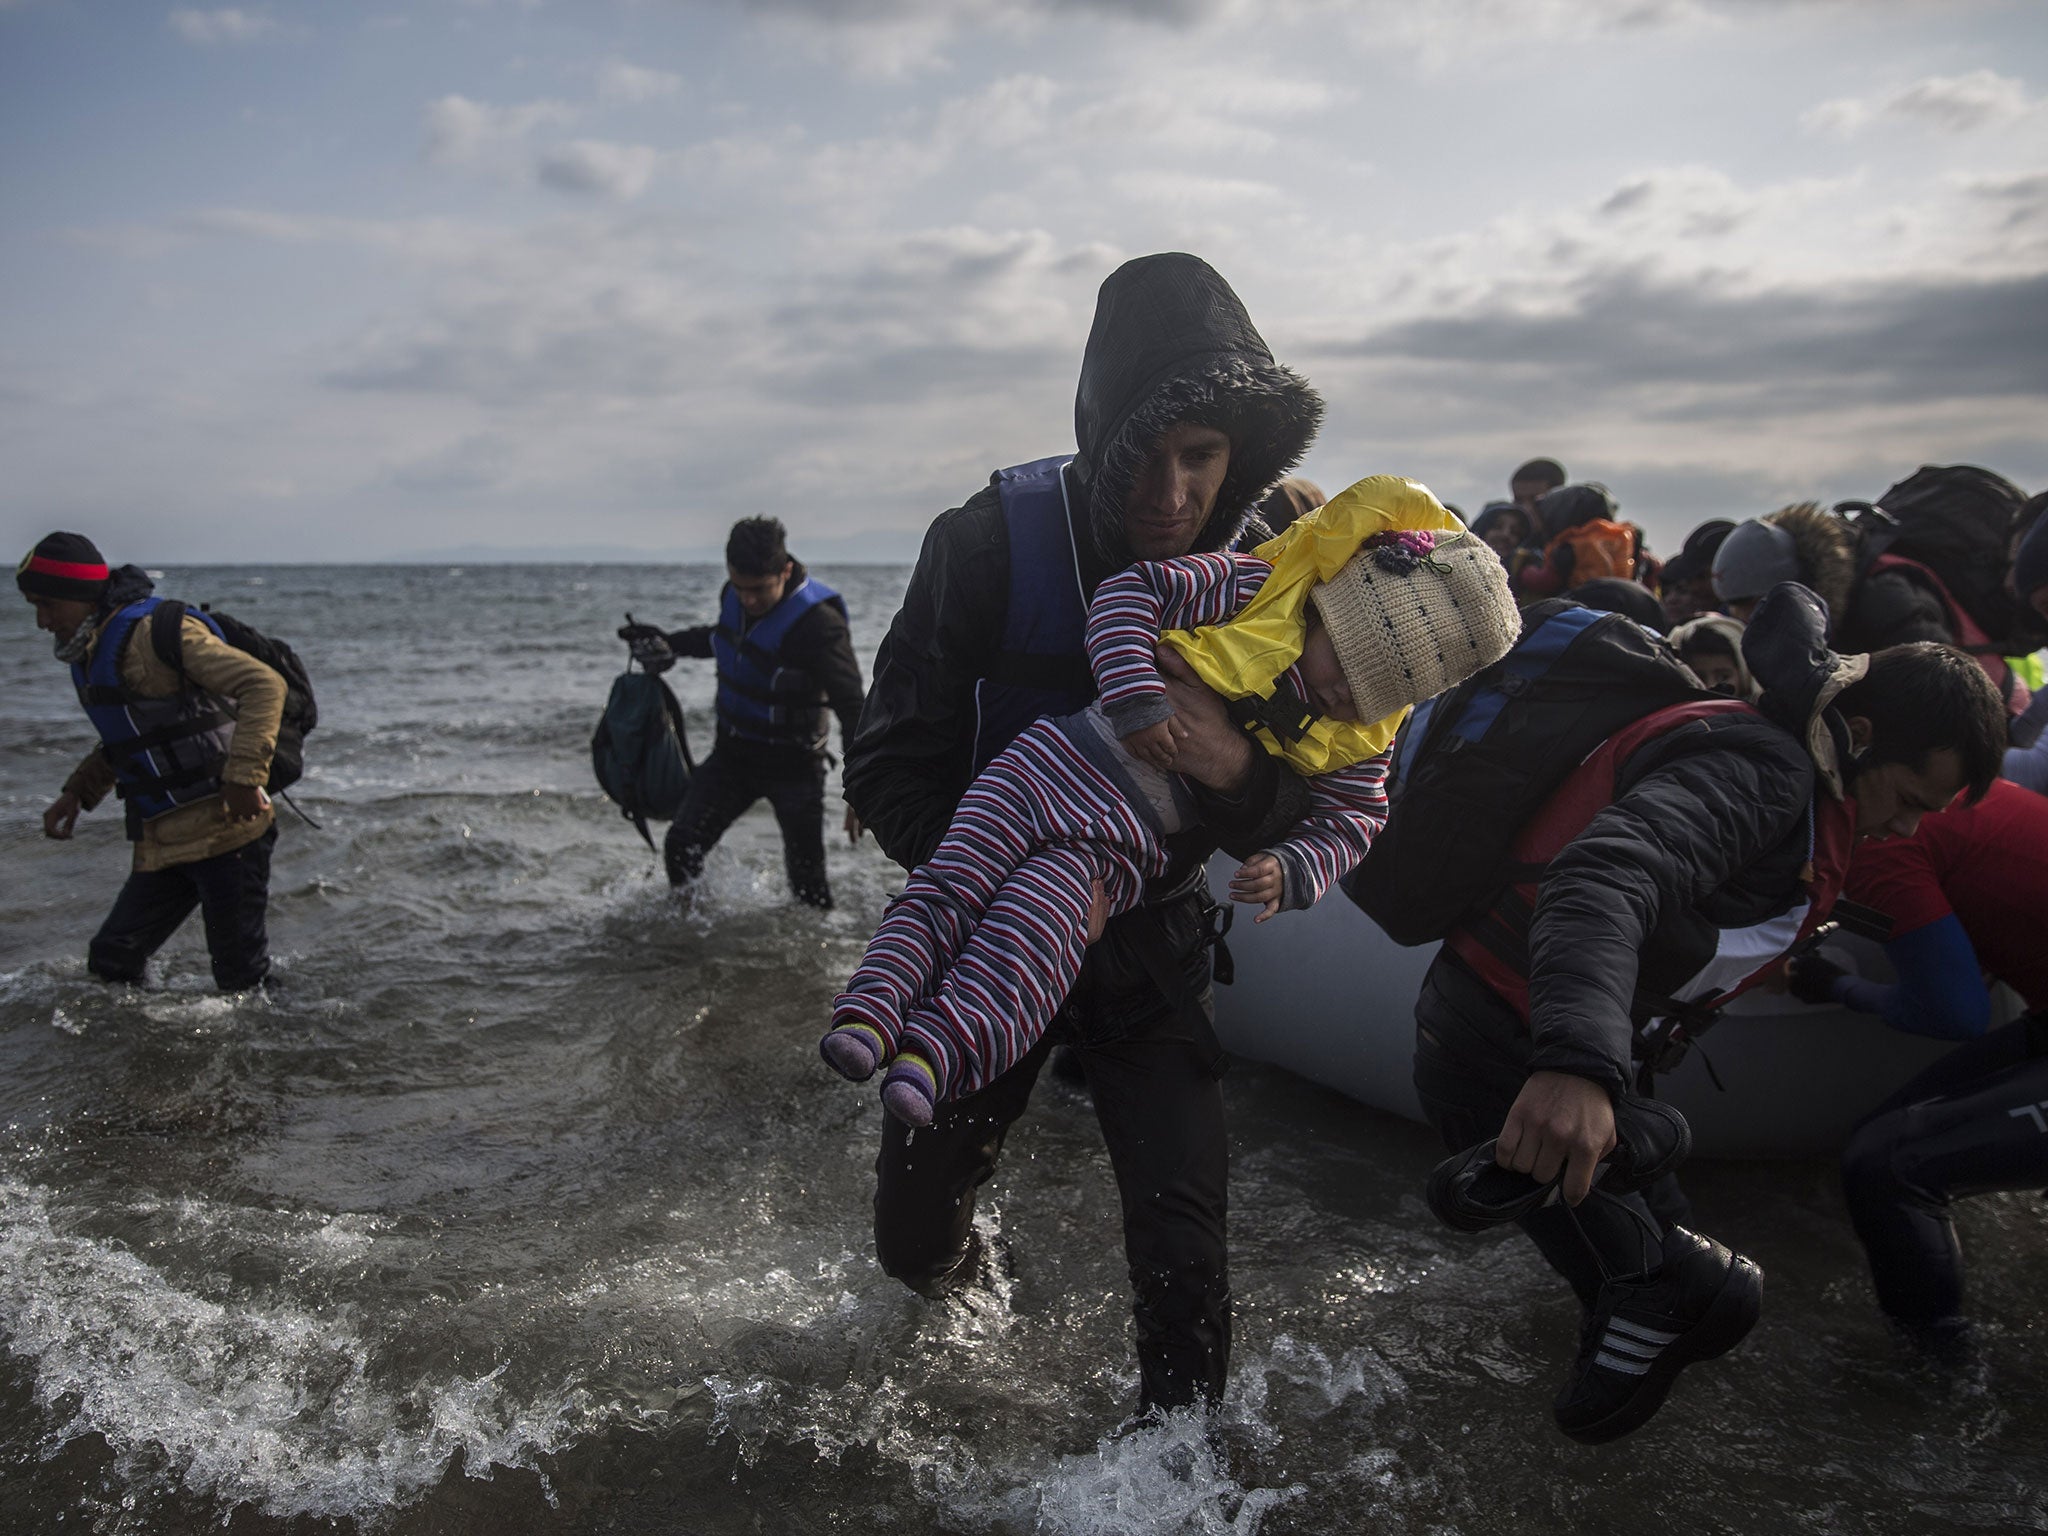 Refugees disembark from a dinghy after their arrival from Turkey on the Greek island of Lesbos, on Saturday, Dec. 12, 2015